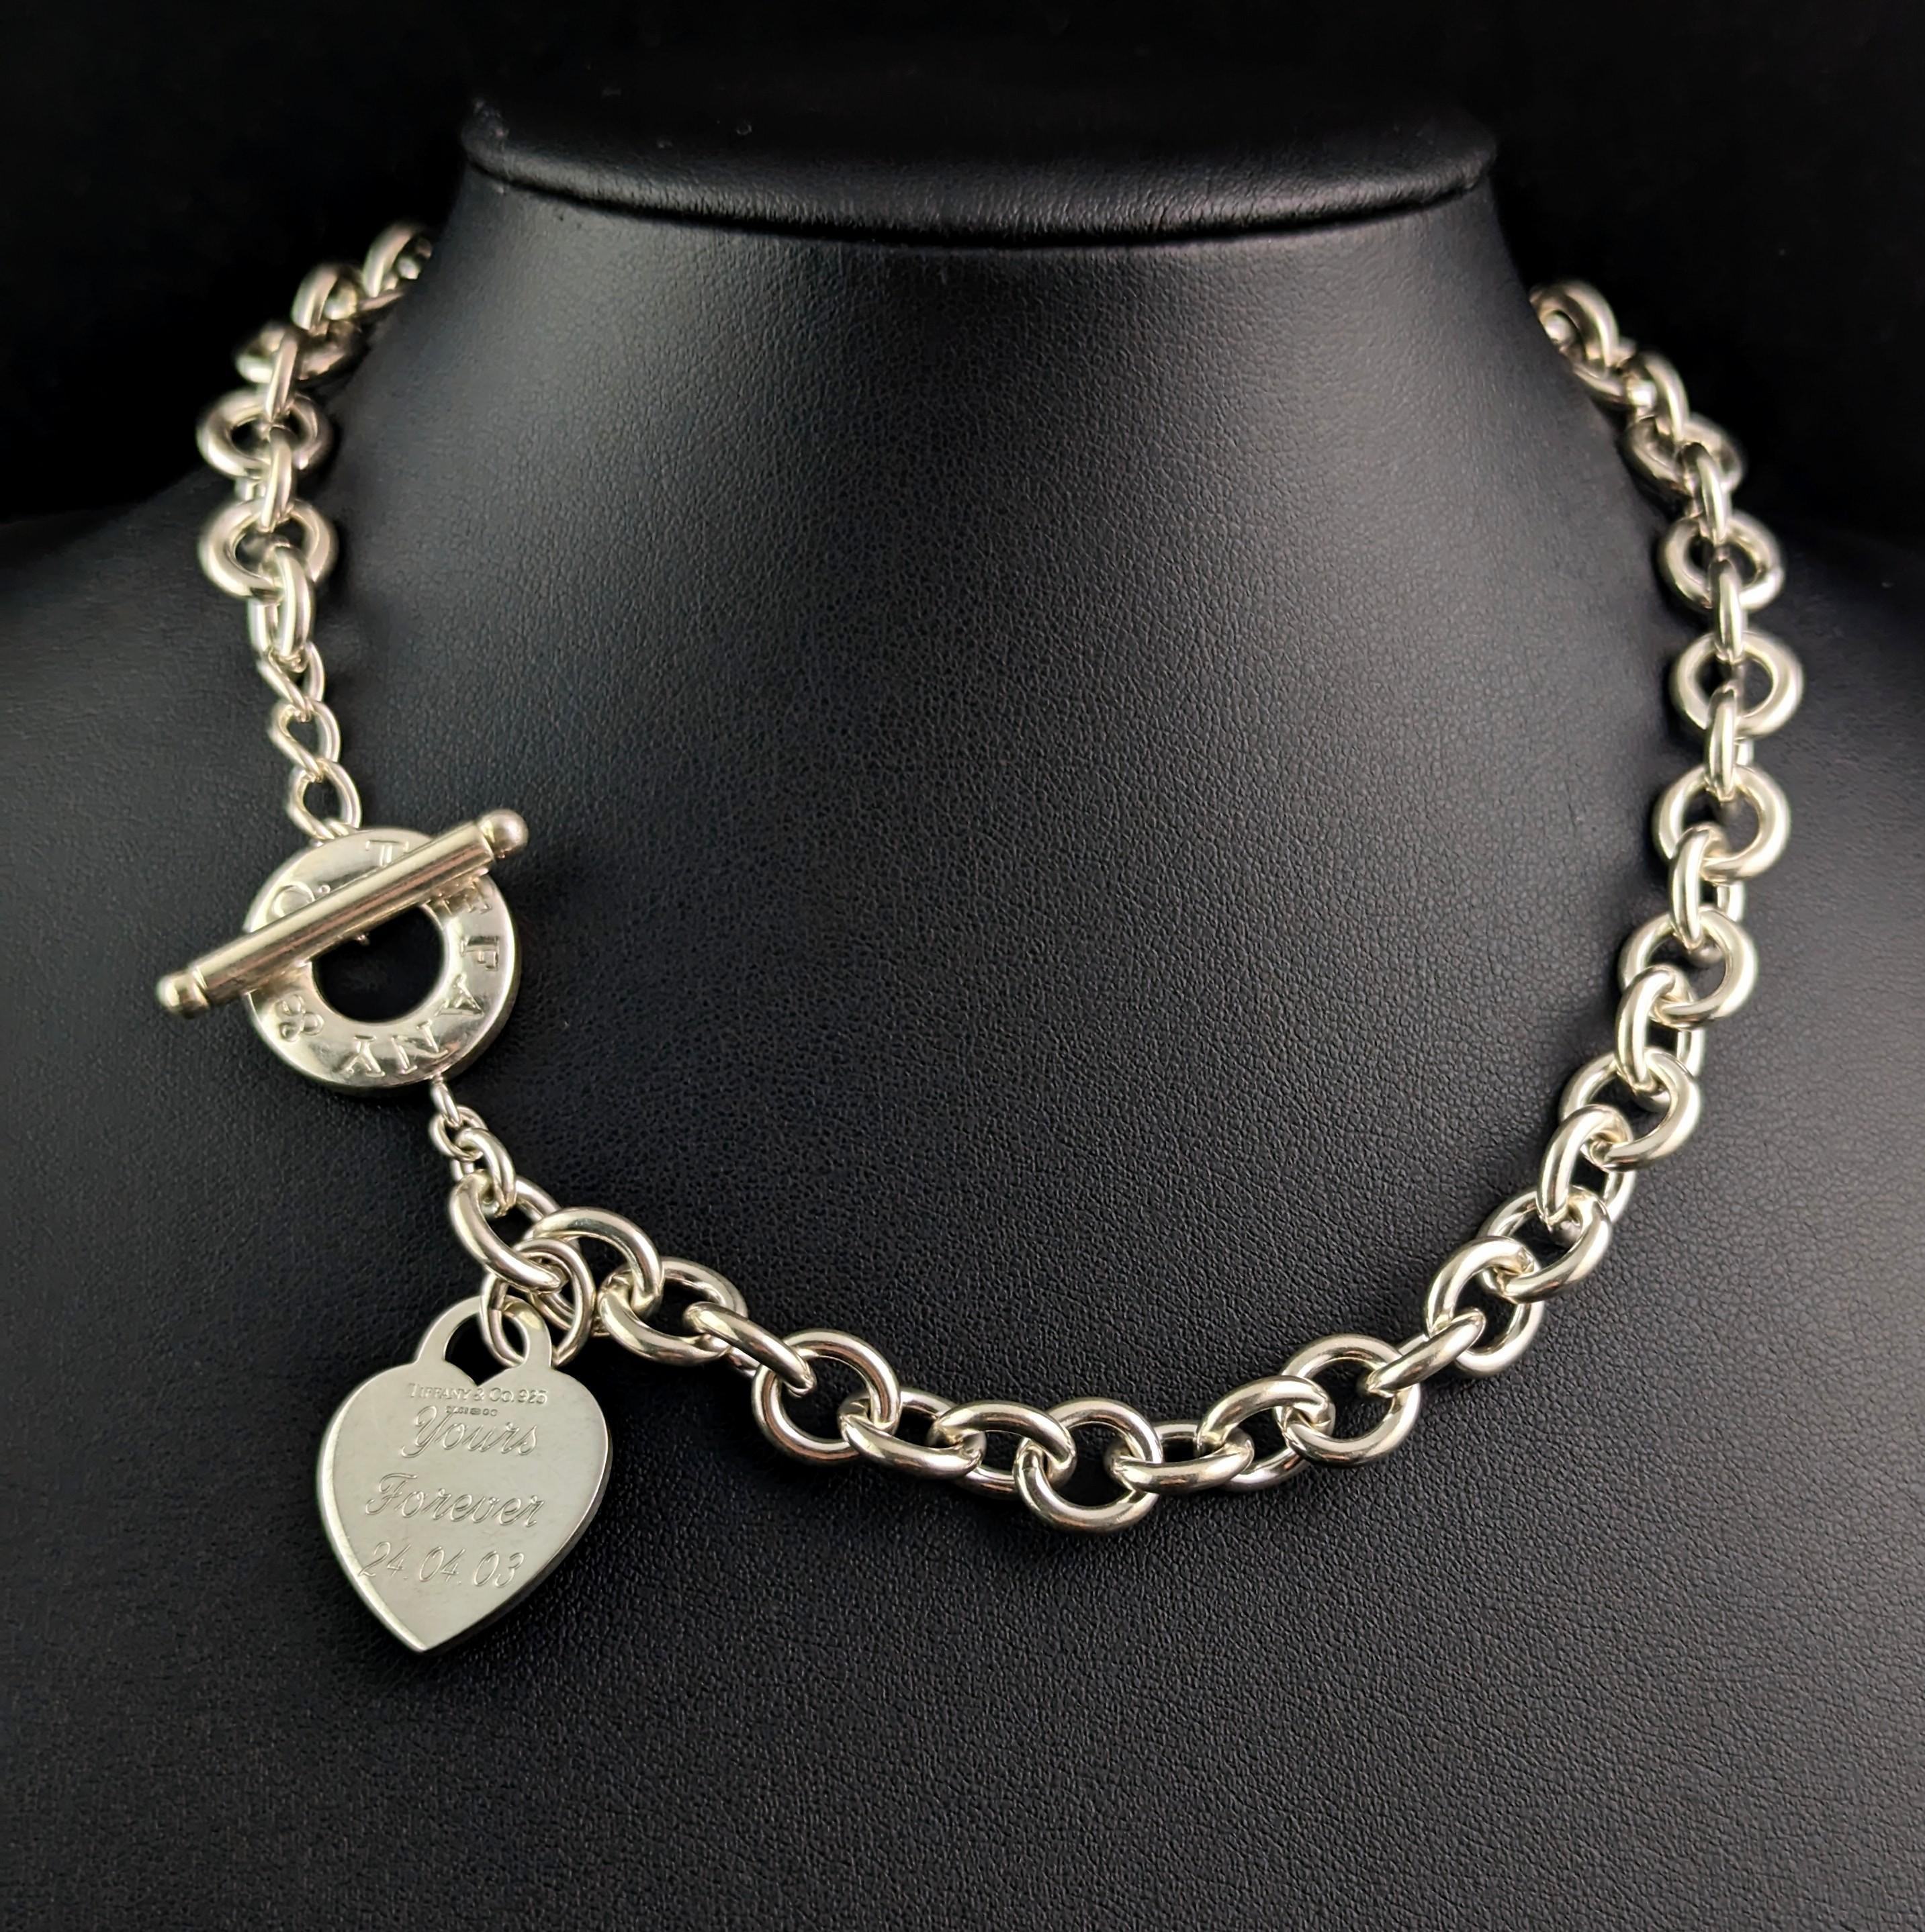 An iconic vintage sterling silver Return to Tiffany heart tag toggle necklace.

It is a choker style chain link necklace with chunky interlocking rolo style links in crisp cool sterling silver.

The heart tag toggle necklace is one of Tiffany's most